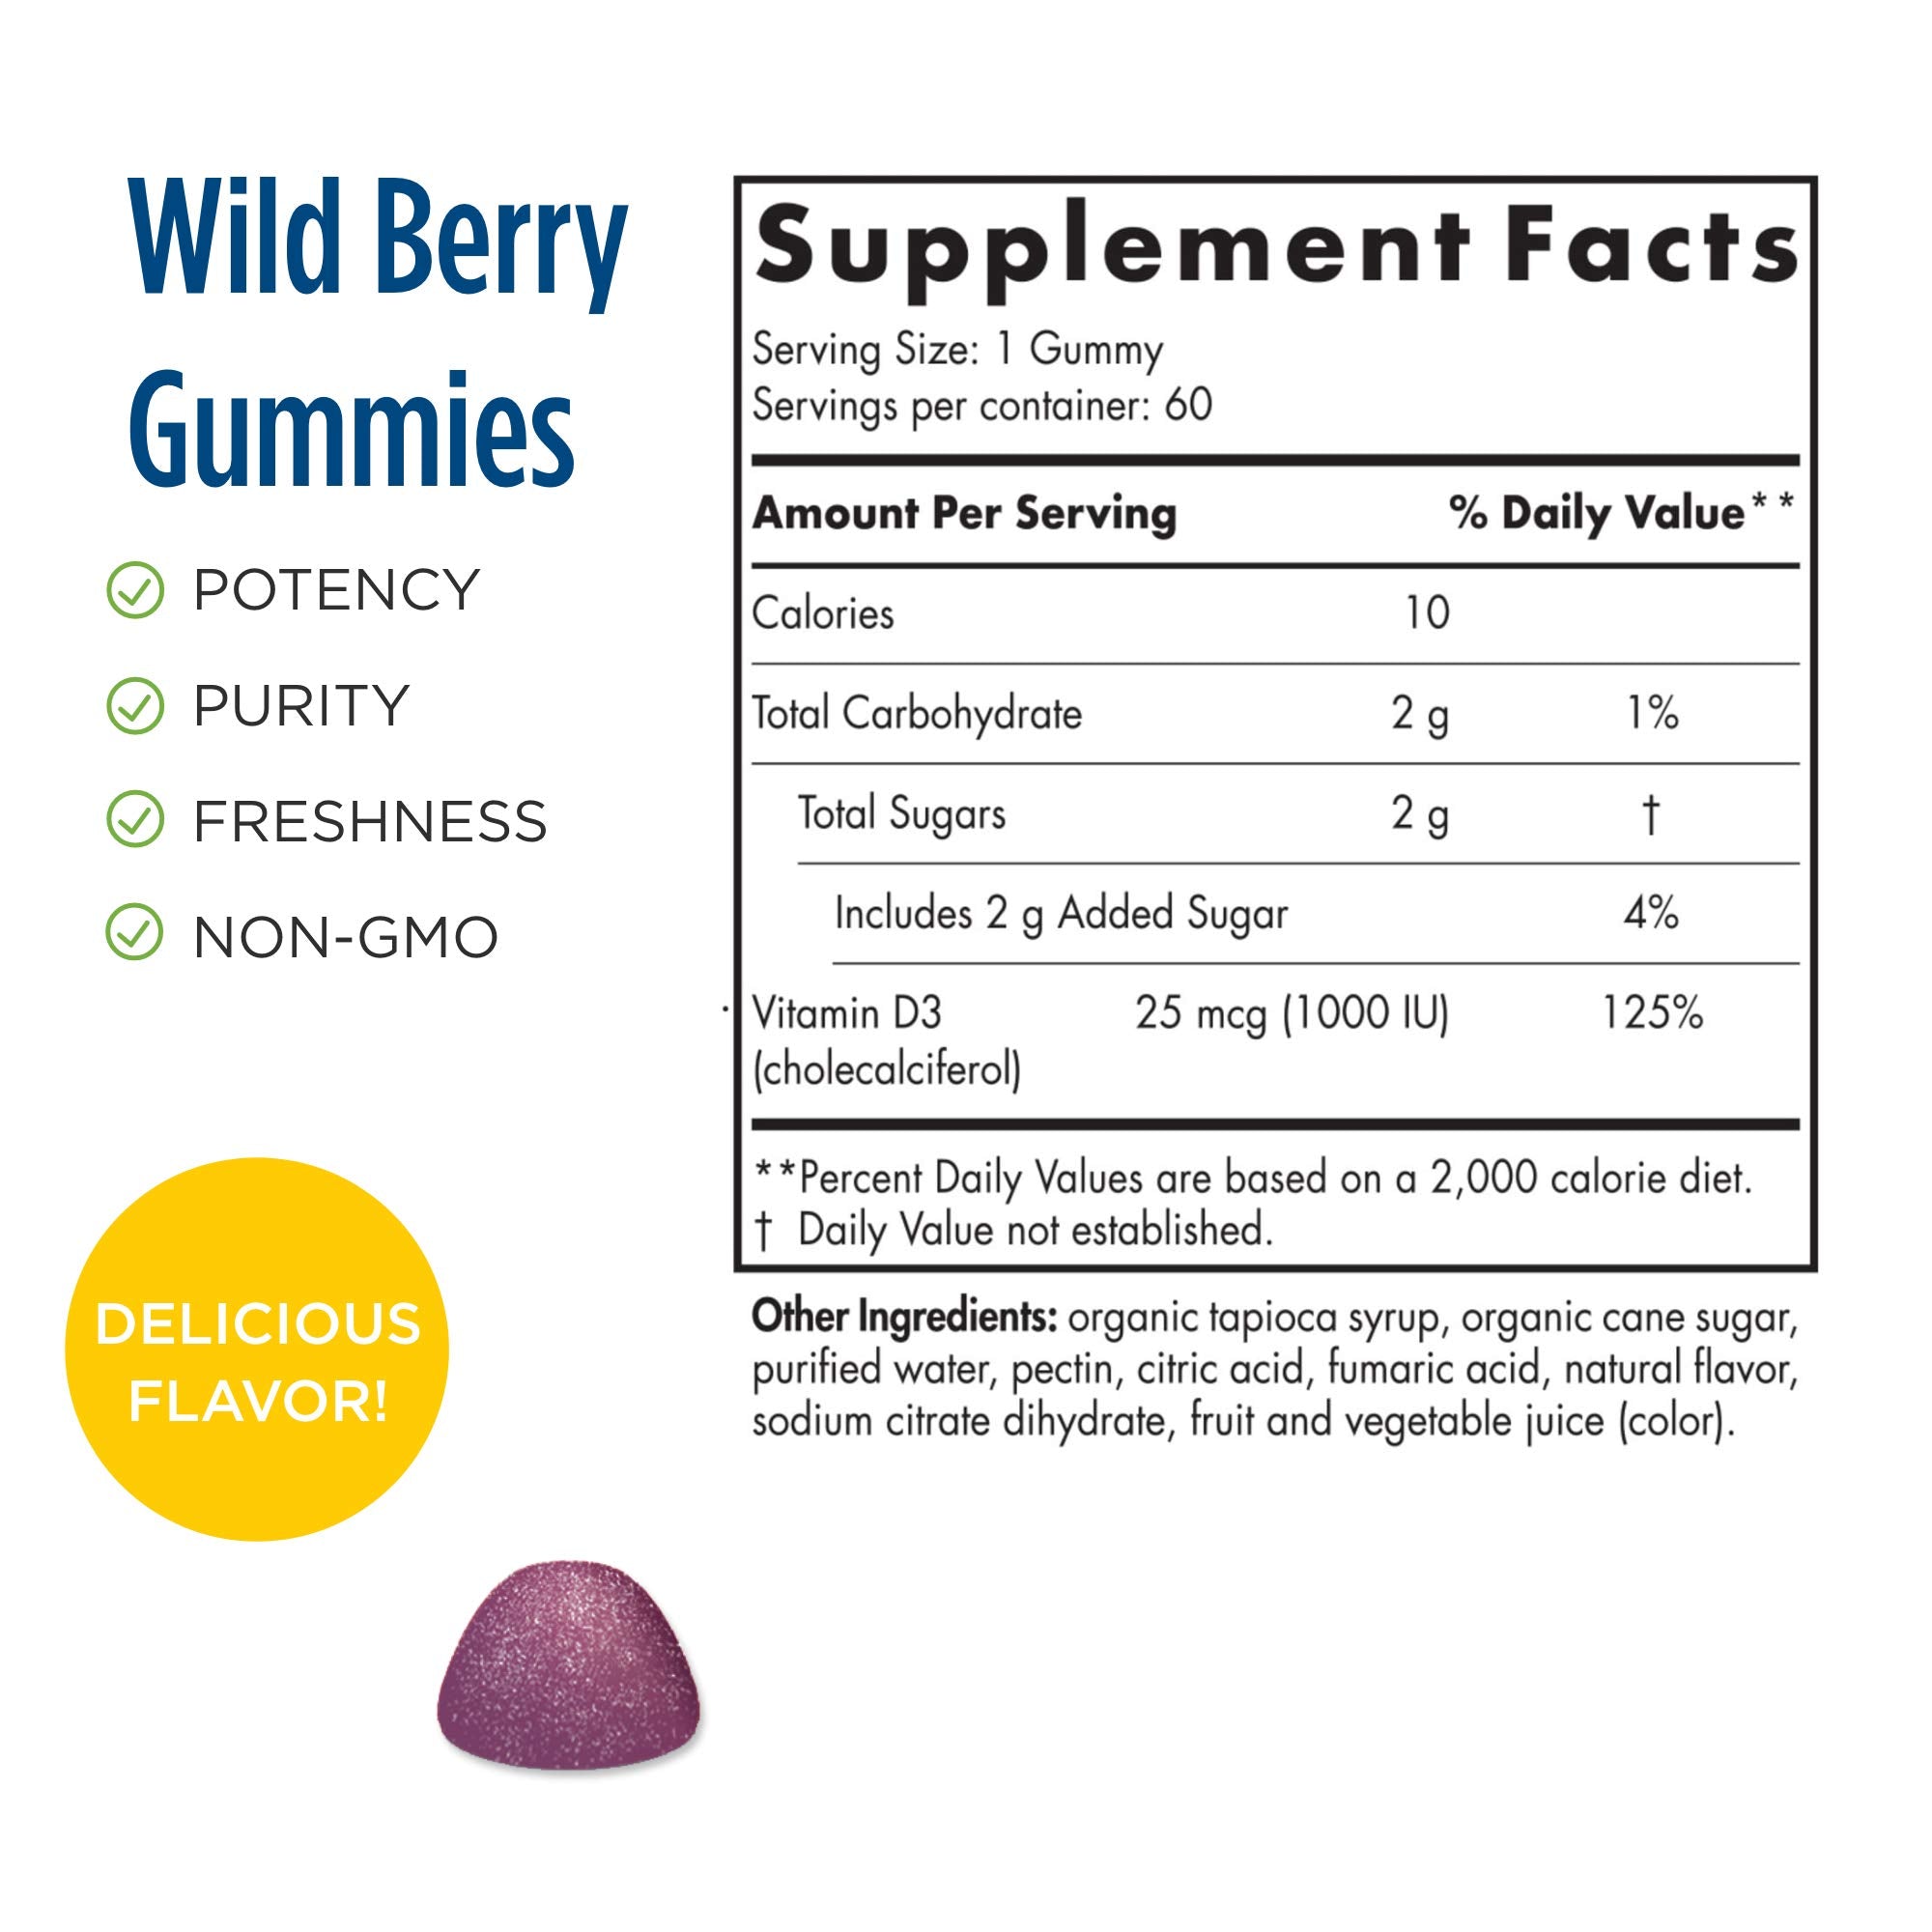 Nordic Naturals Vitamin D3 Gummies - Healthy Bones, Mood, and Immune System Function*, 60 Count